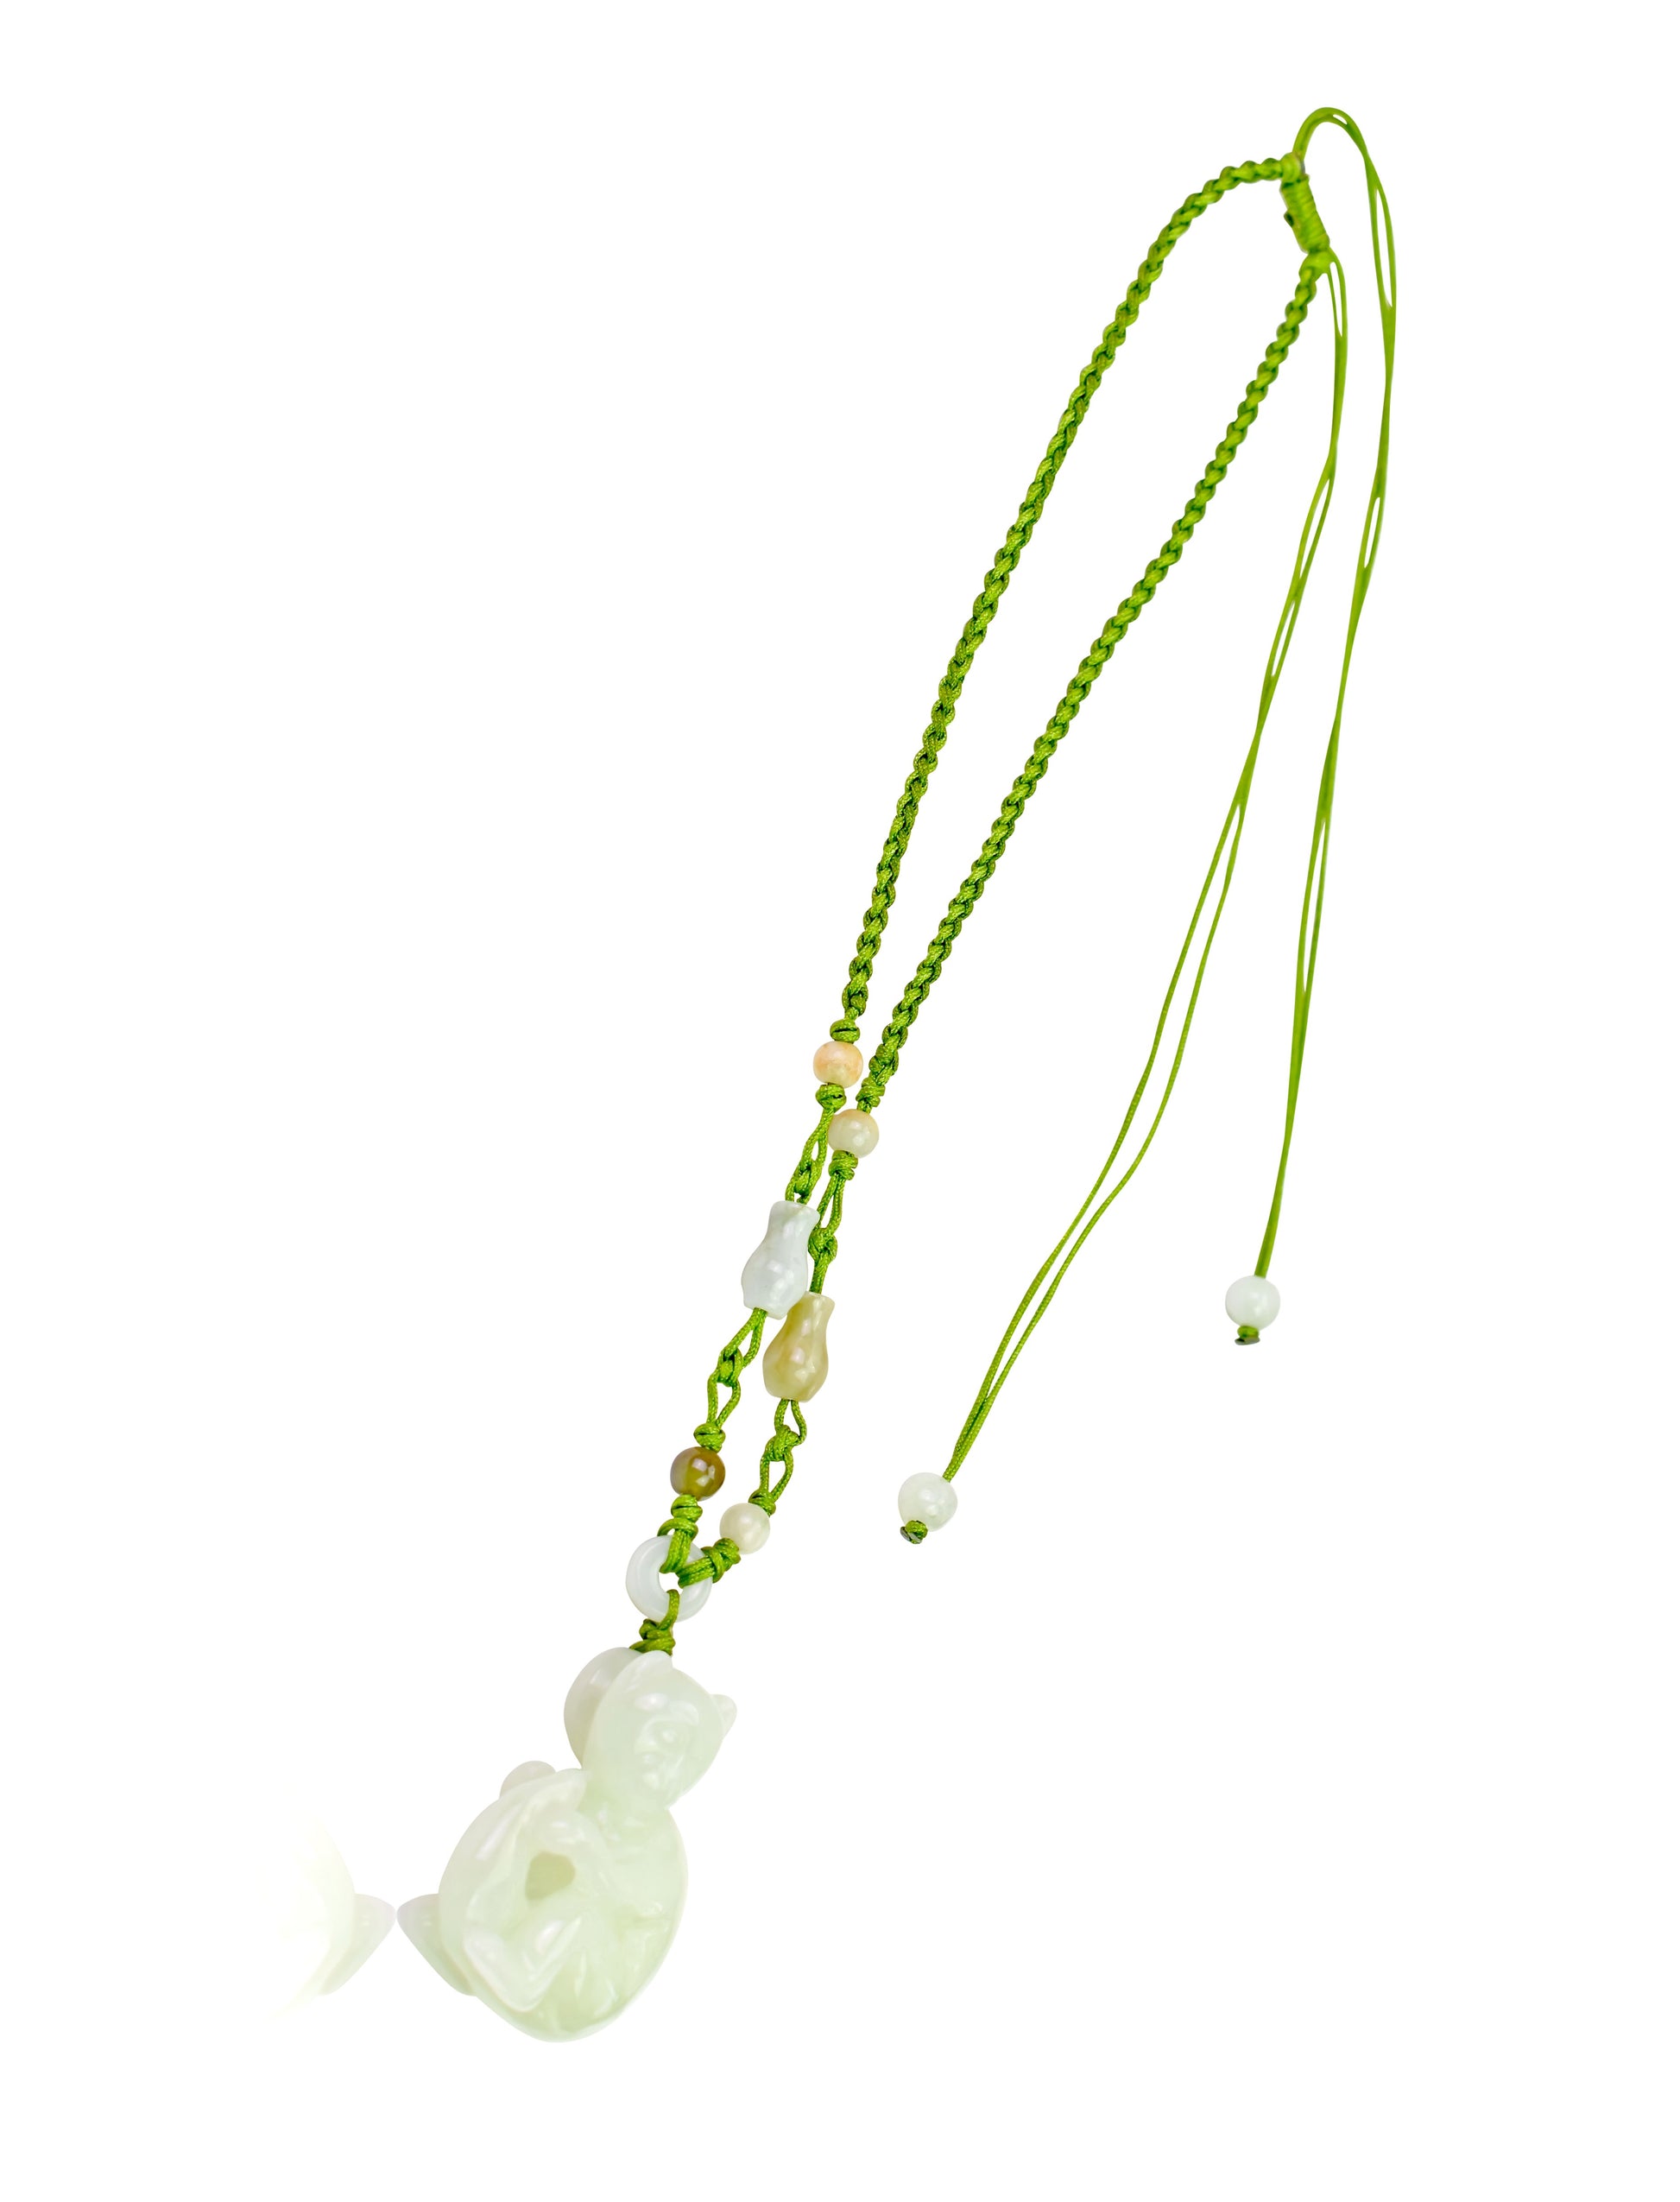 Unique Handmade Jewelry: Banana Monkey Jade Necklace made with Lime Cord